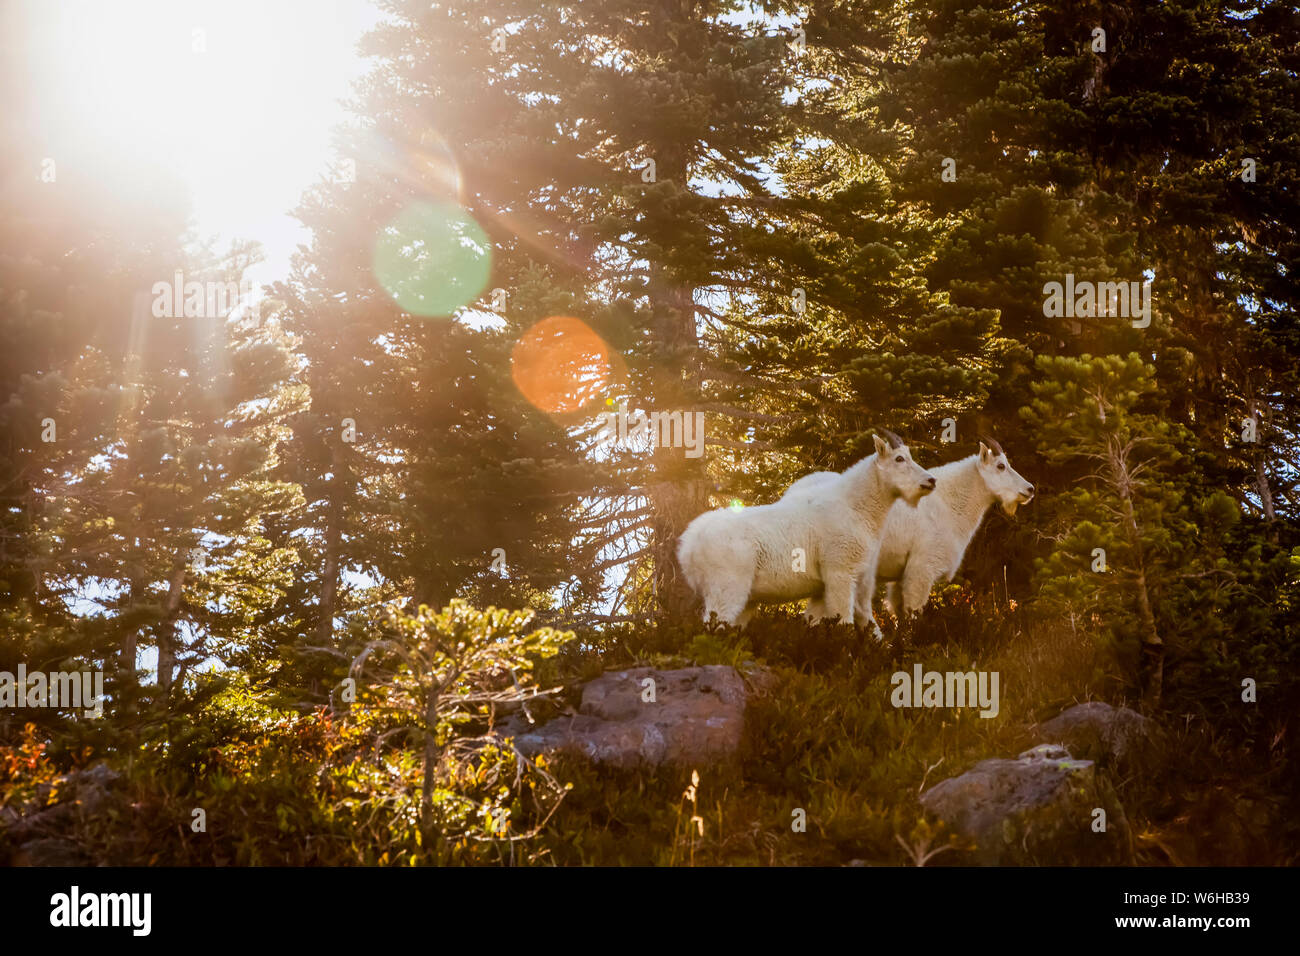 Mountain goats (Oreamnos americanus) backlit by sun, High Divide Trail, Olympic National Park; Washington, United States of America Stock Photo